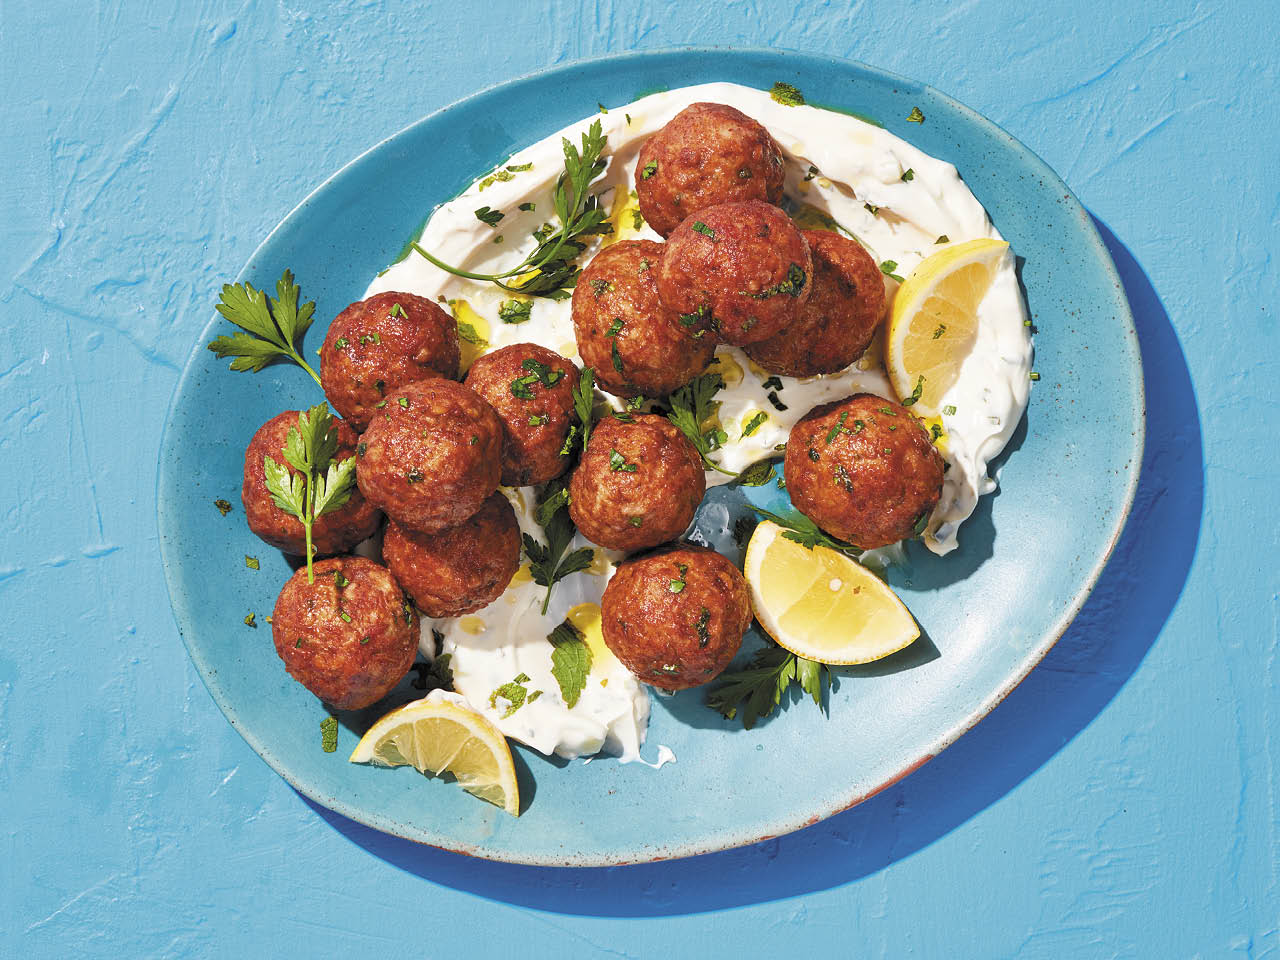 4 New Recipes To Help You Master The Art Of The Meatball - Chatelaine